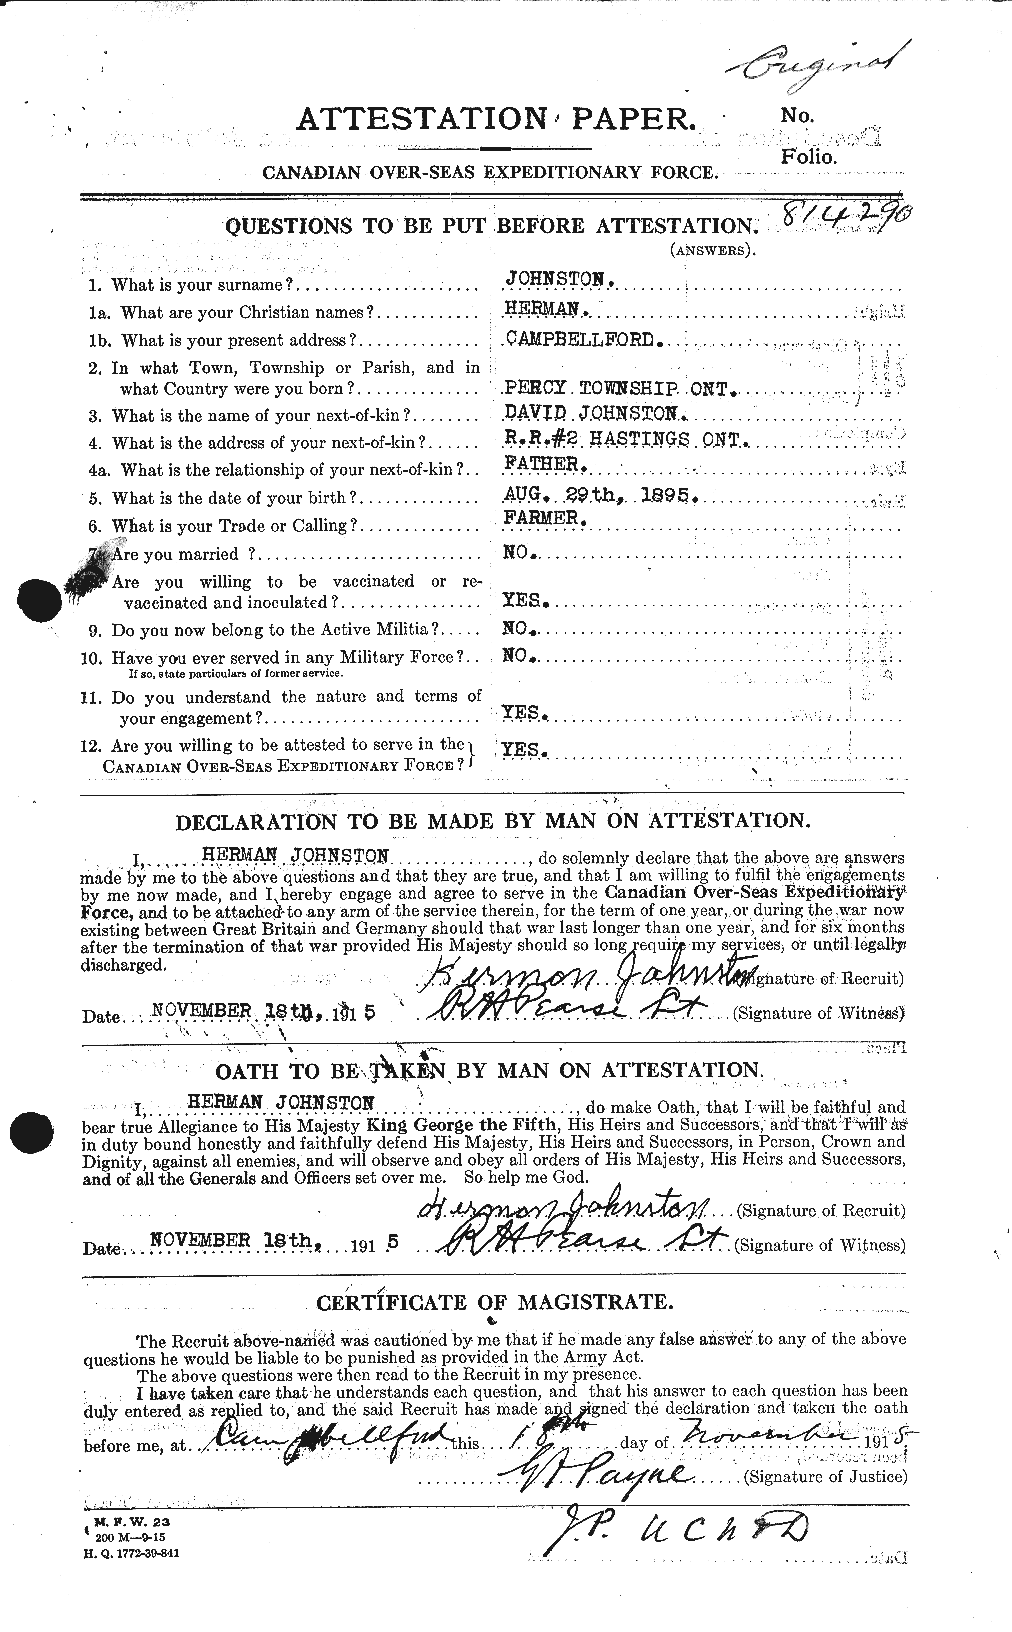 Personnel Records of the First World War - CEF 419563a